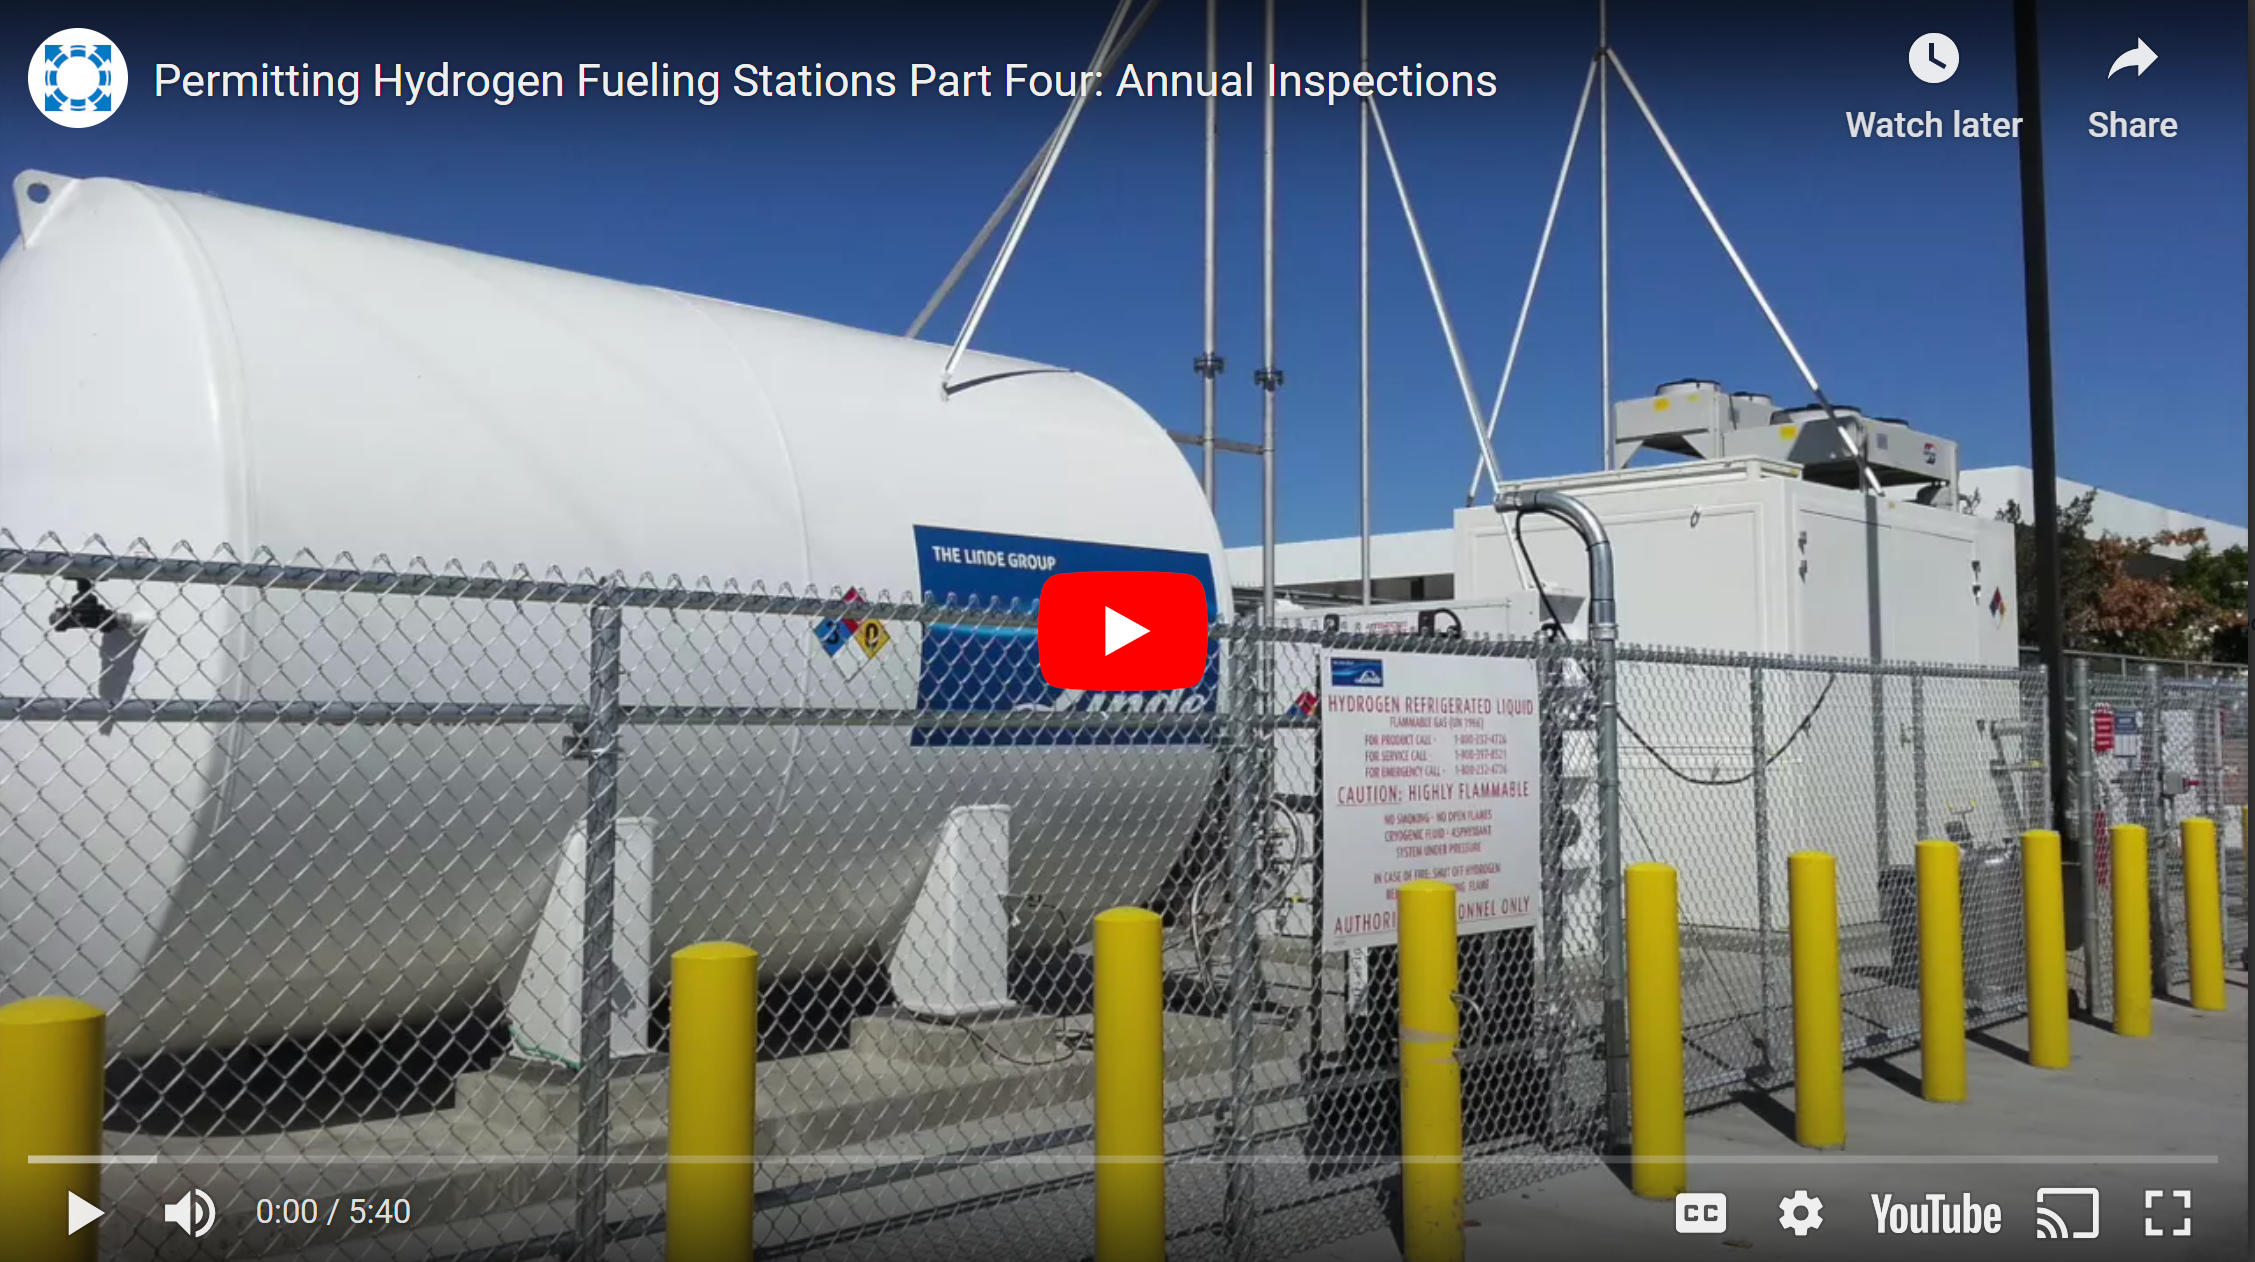 Permitting Hydrogen Fueling Stations Part Four: Annual Inspections